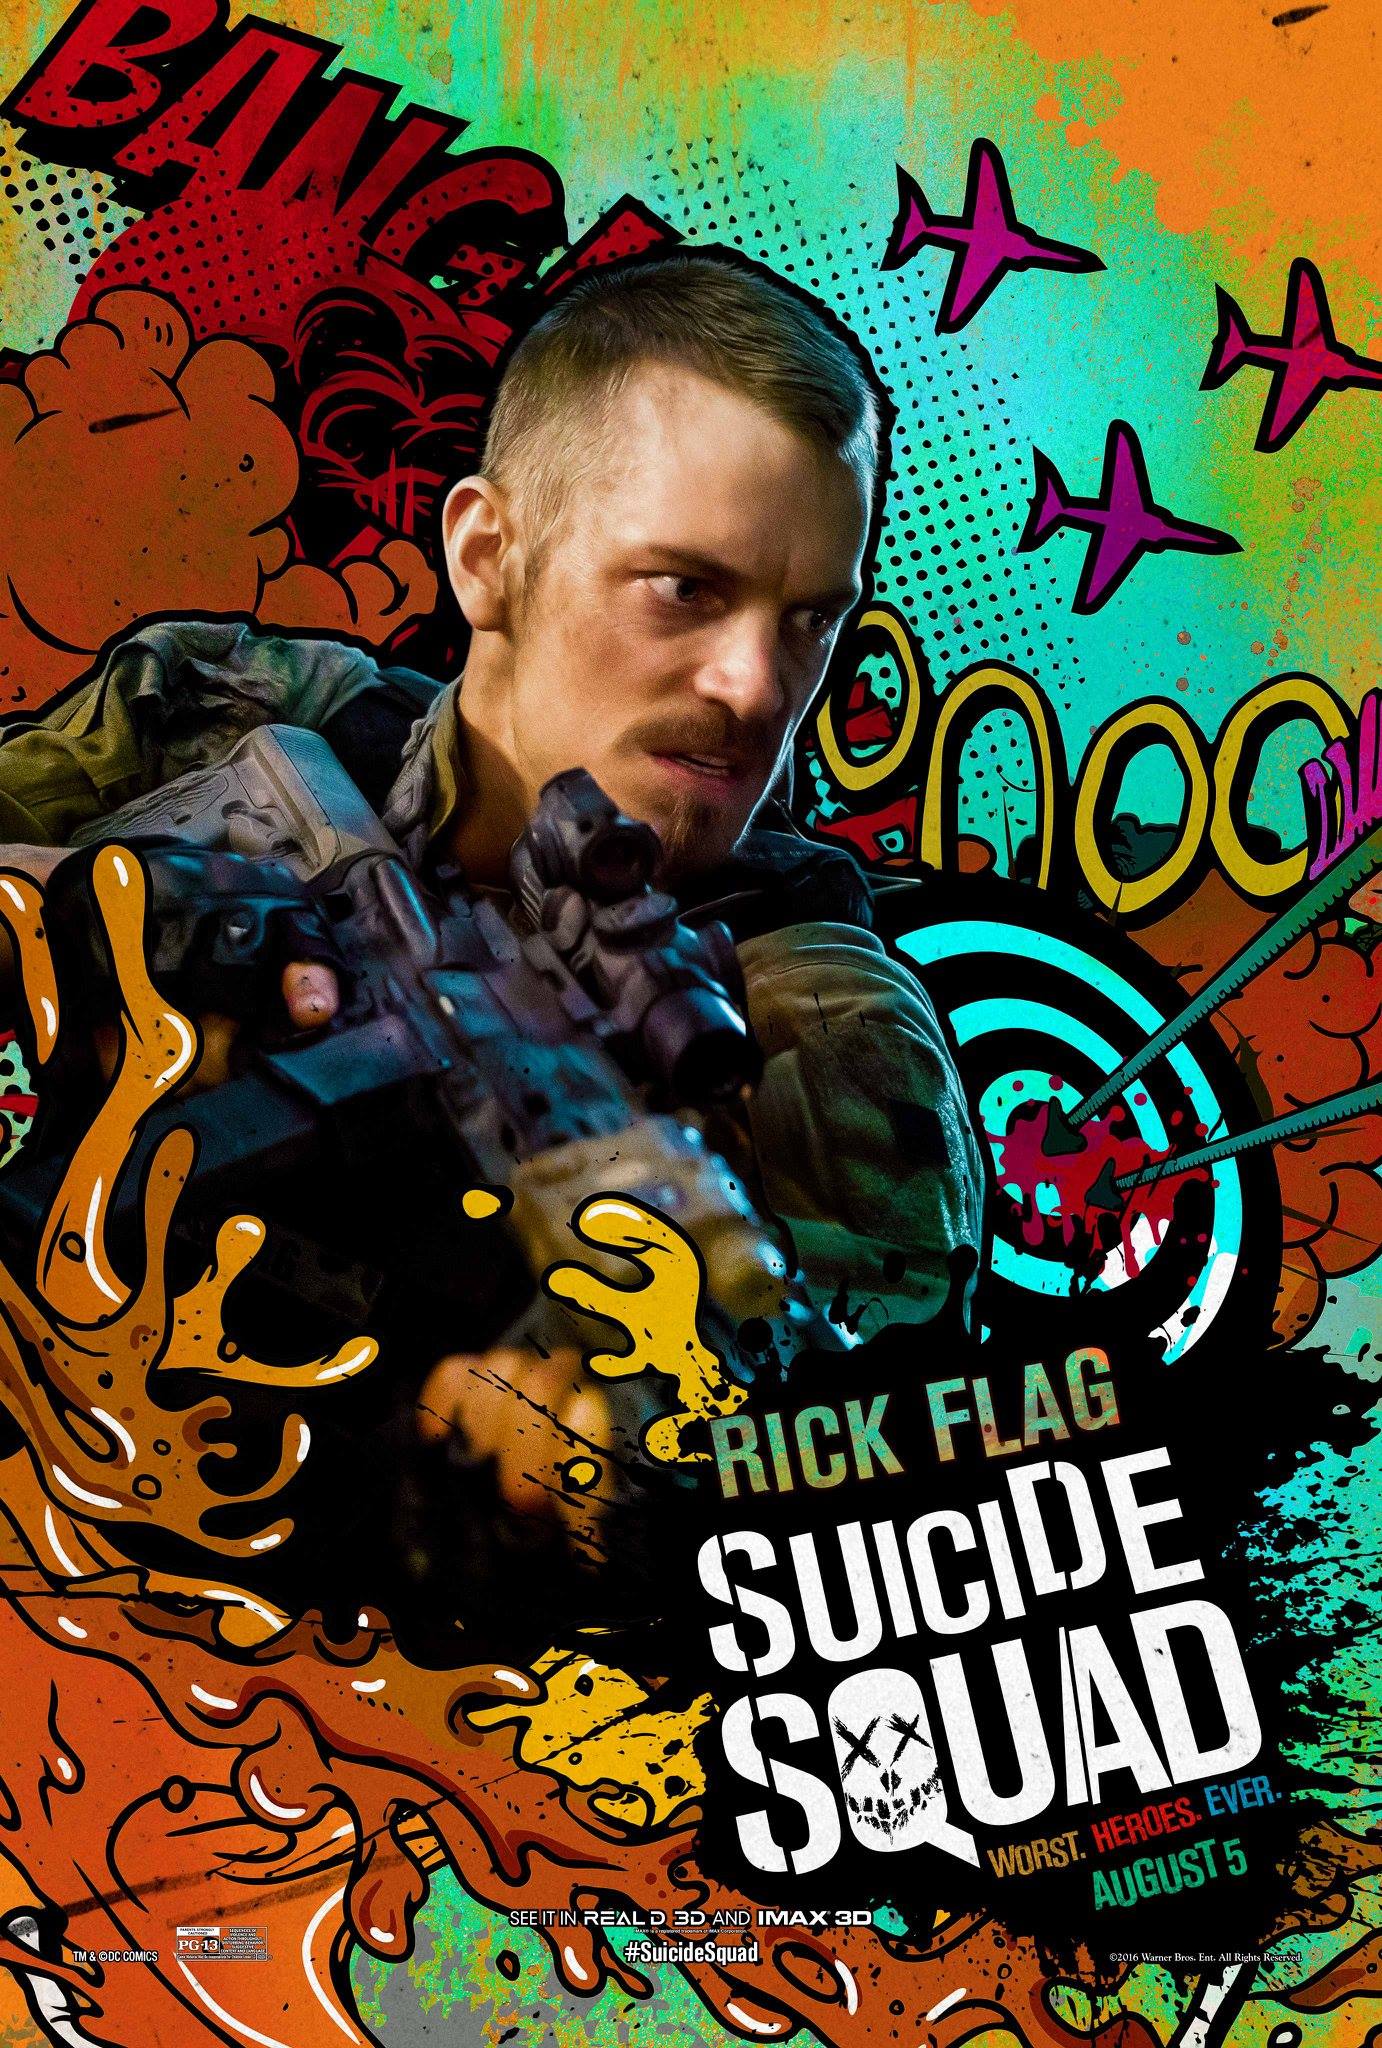 Suicide Squad: New Character Posters Are Just Plain Bad